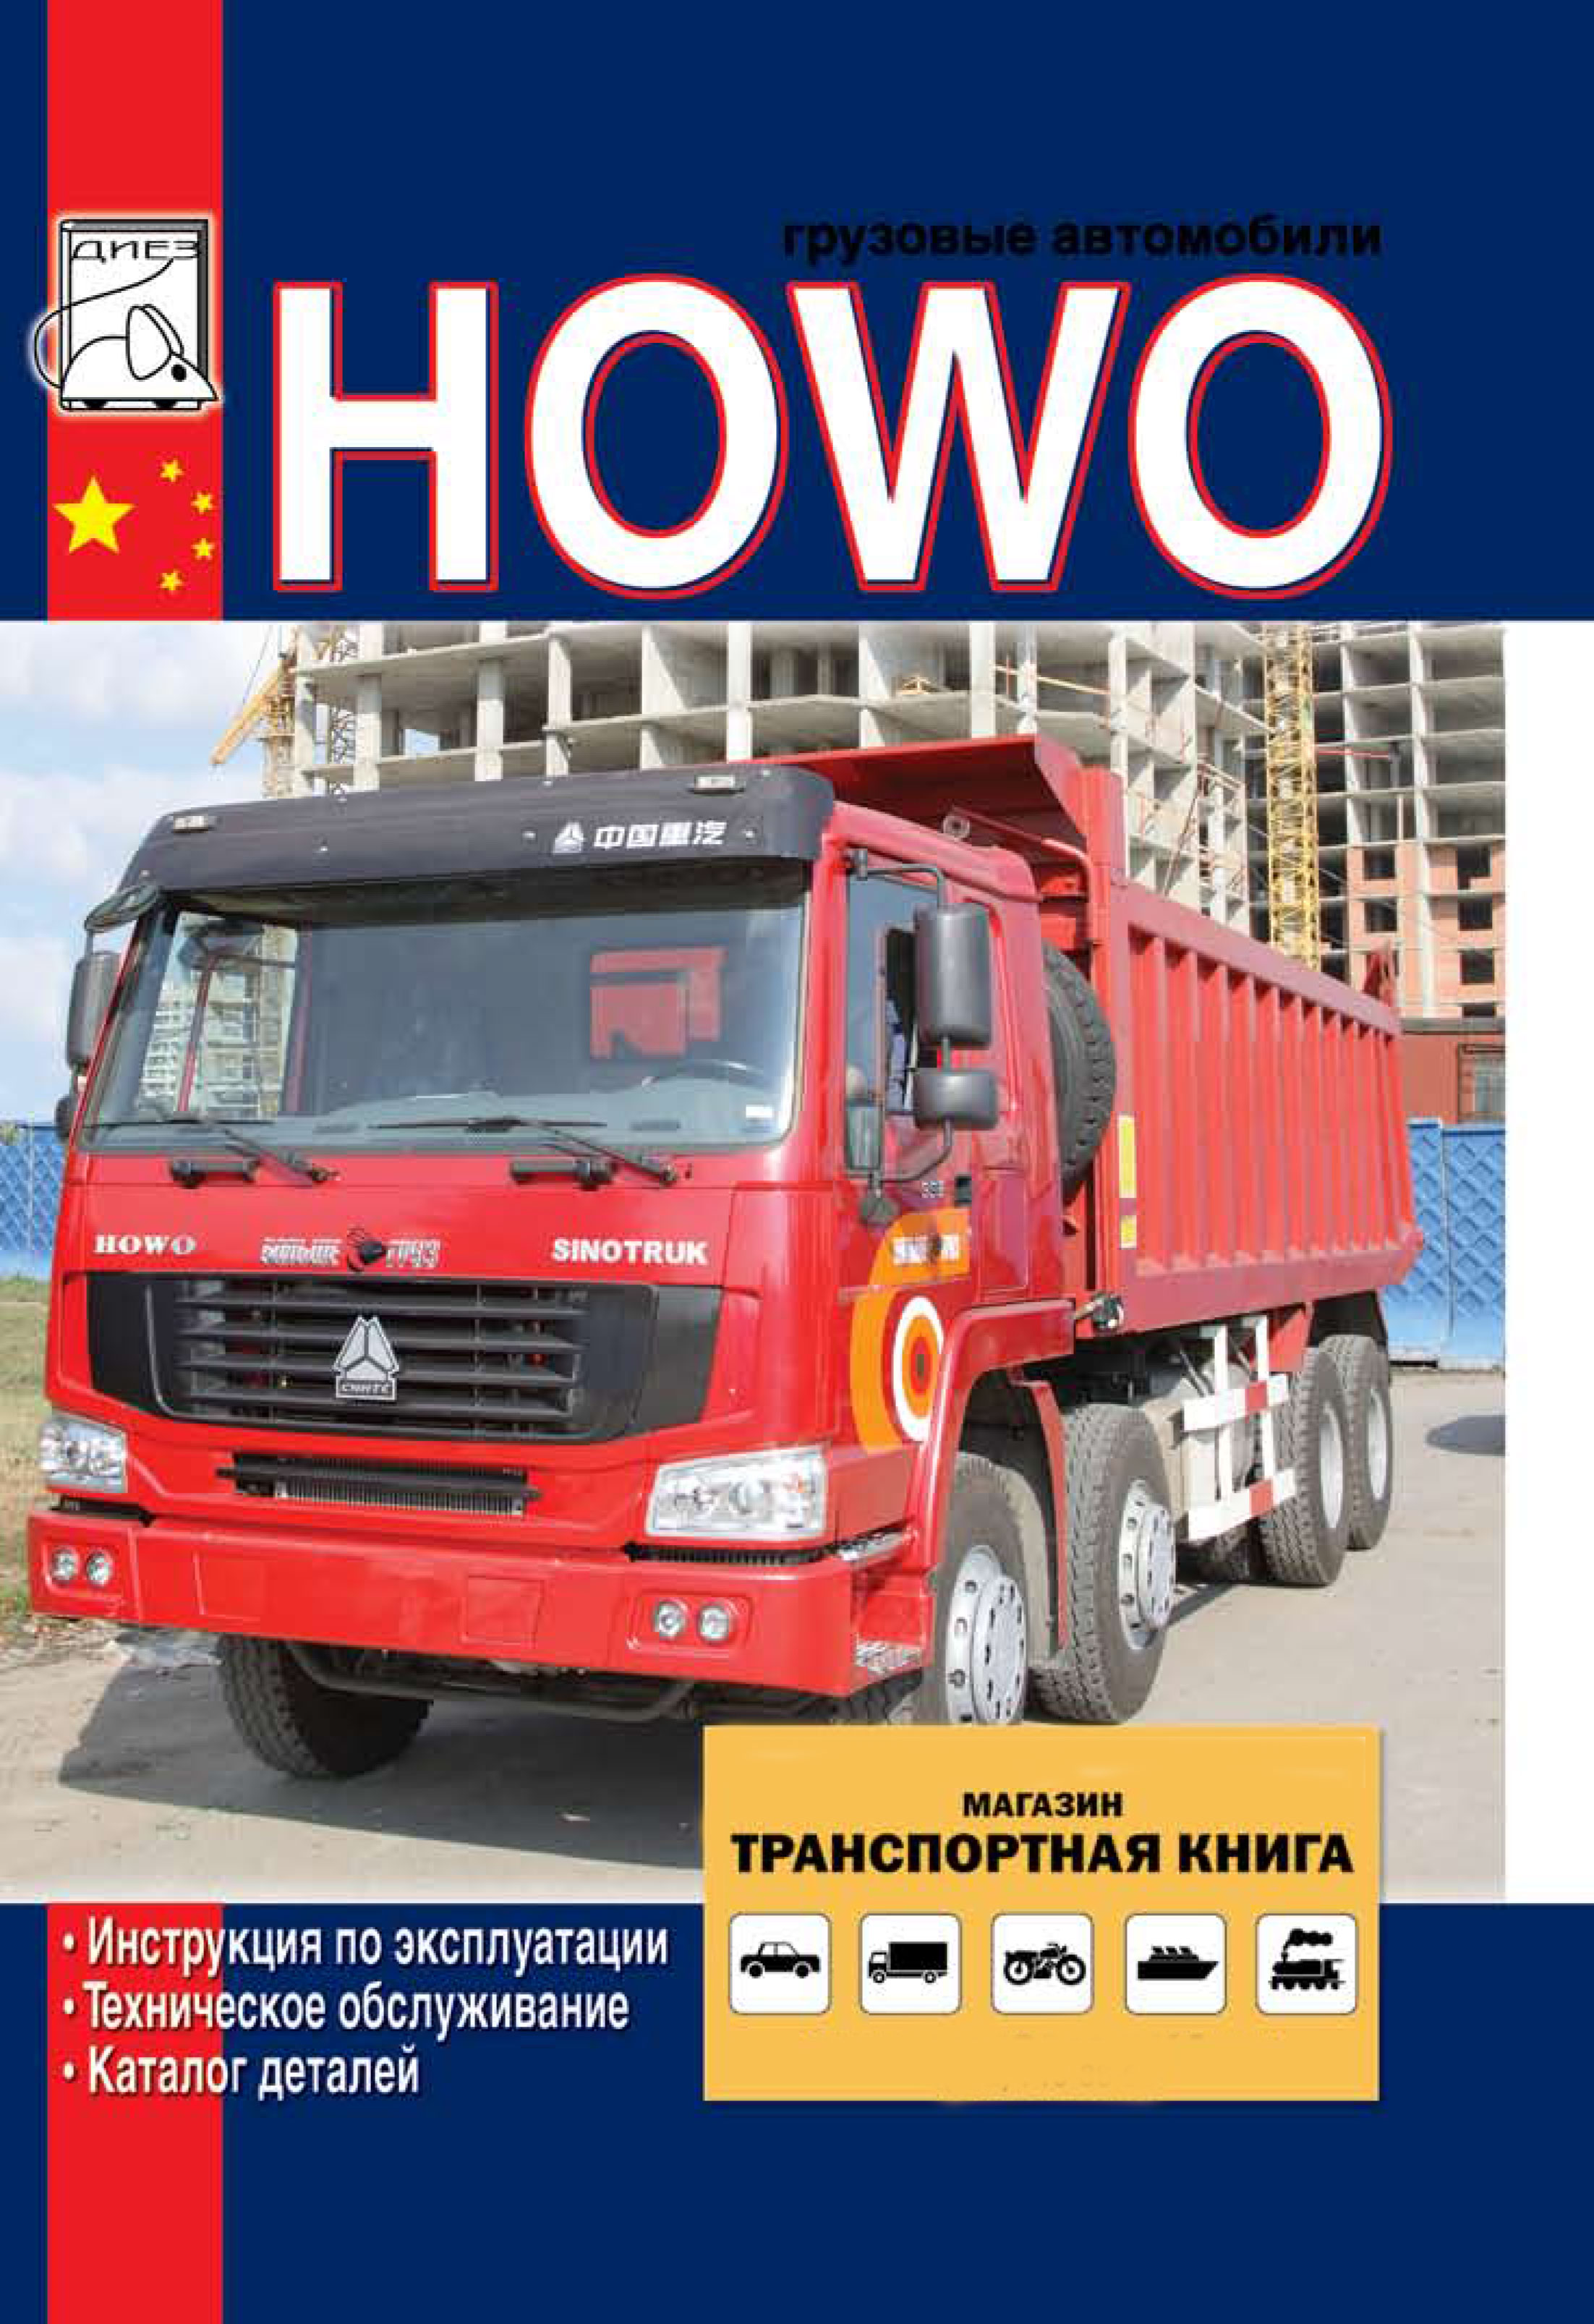 Howo witn engines WD615 / WD618, user e-manual, parts catalog and wiring diagrams (in Russian)